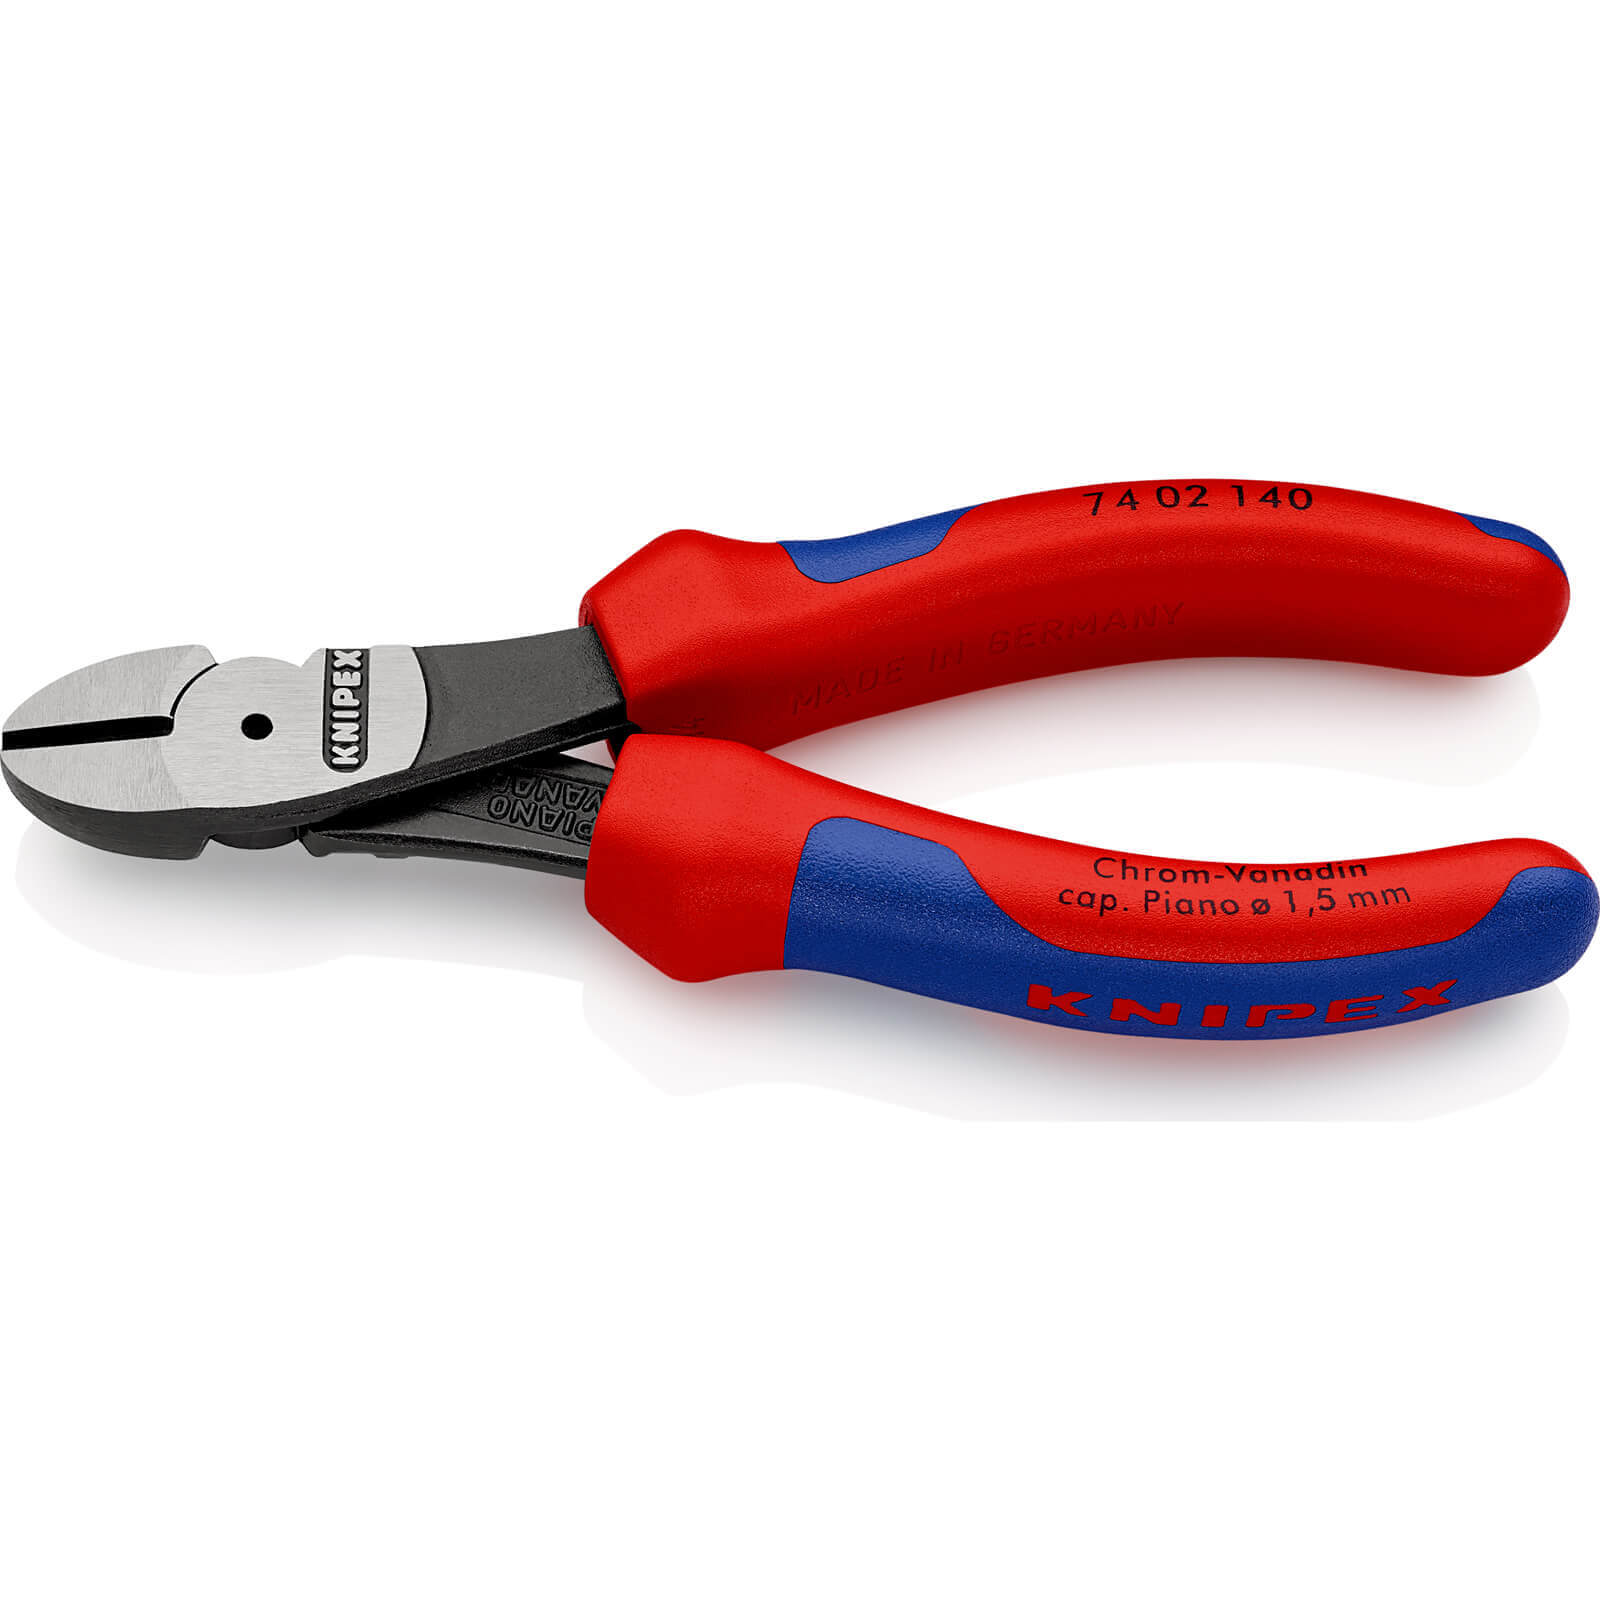 Image of Knipex 74 02 Diagonal Cutting Pliers 140mm